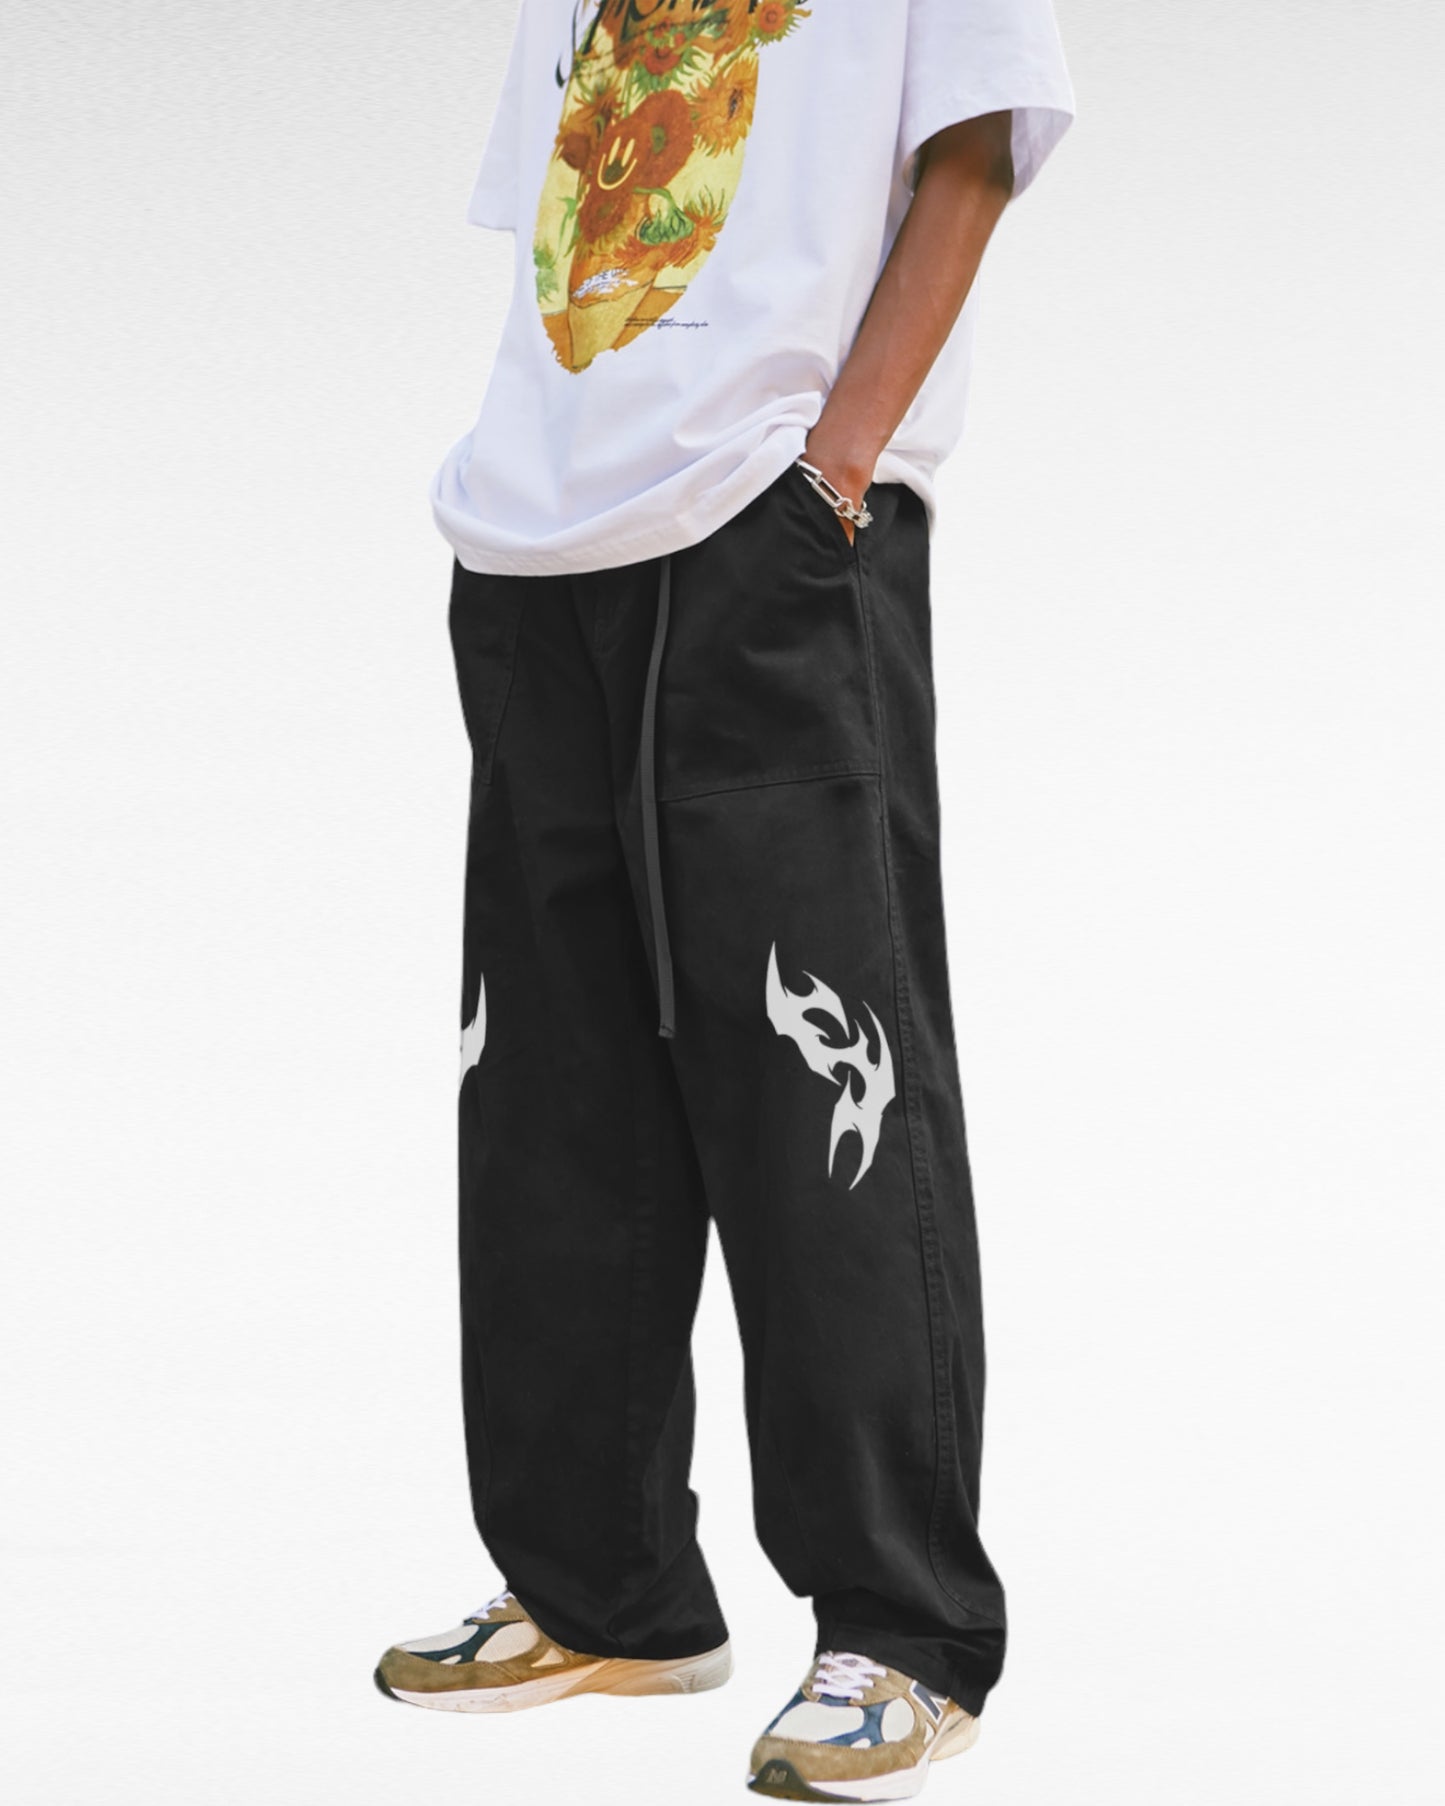 Unisex Solid Color Wide-Legged Neo Tribal Black Pants